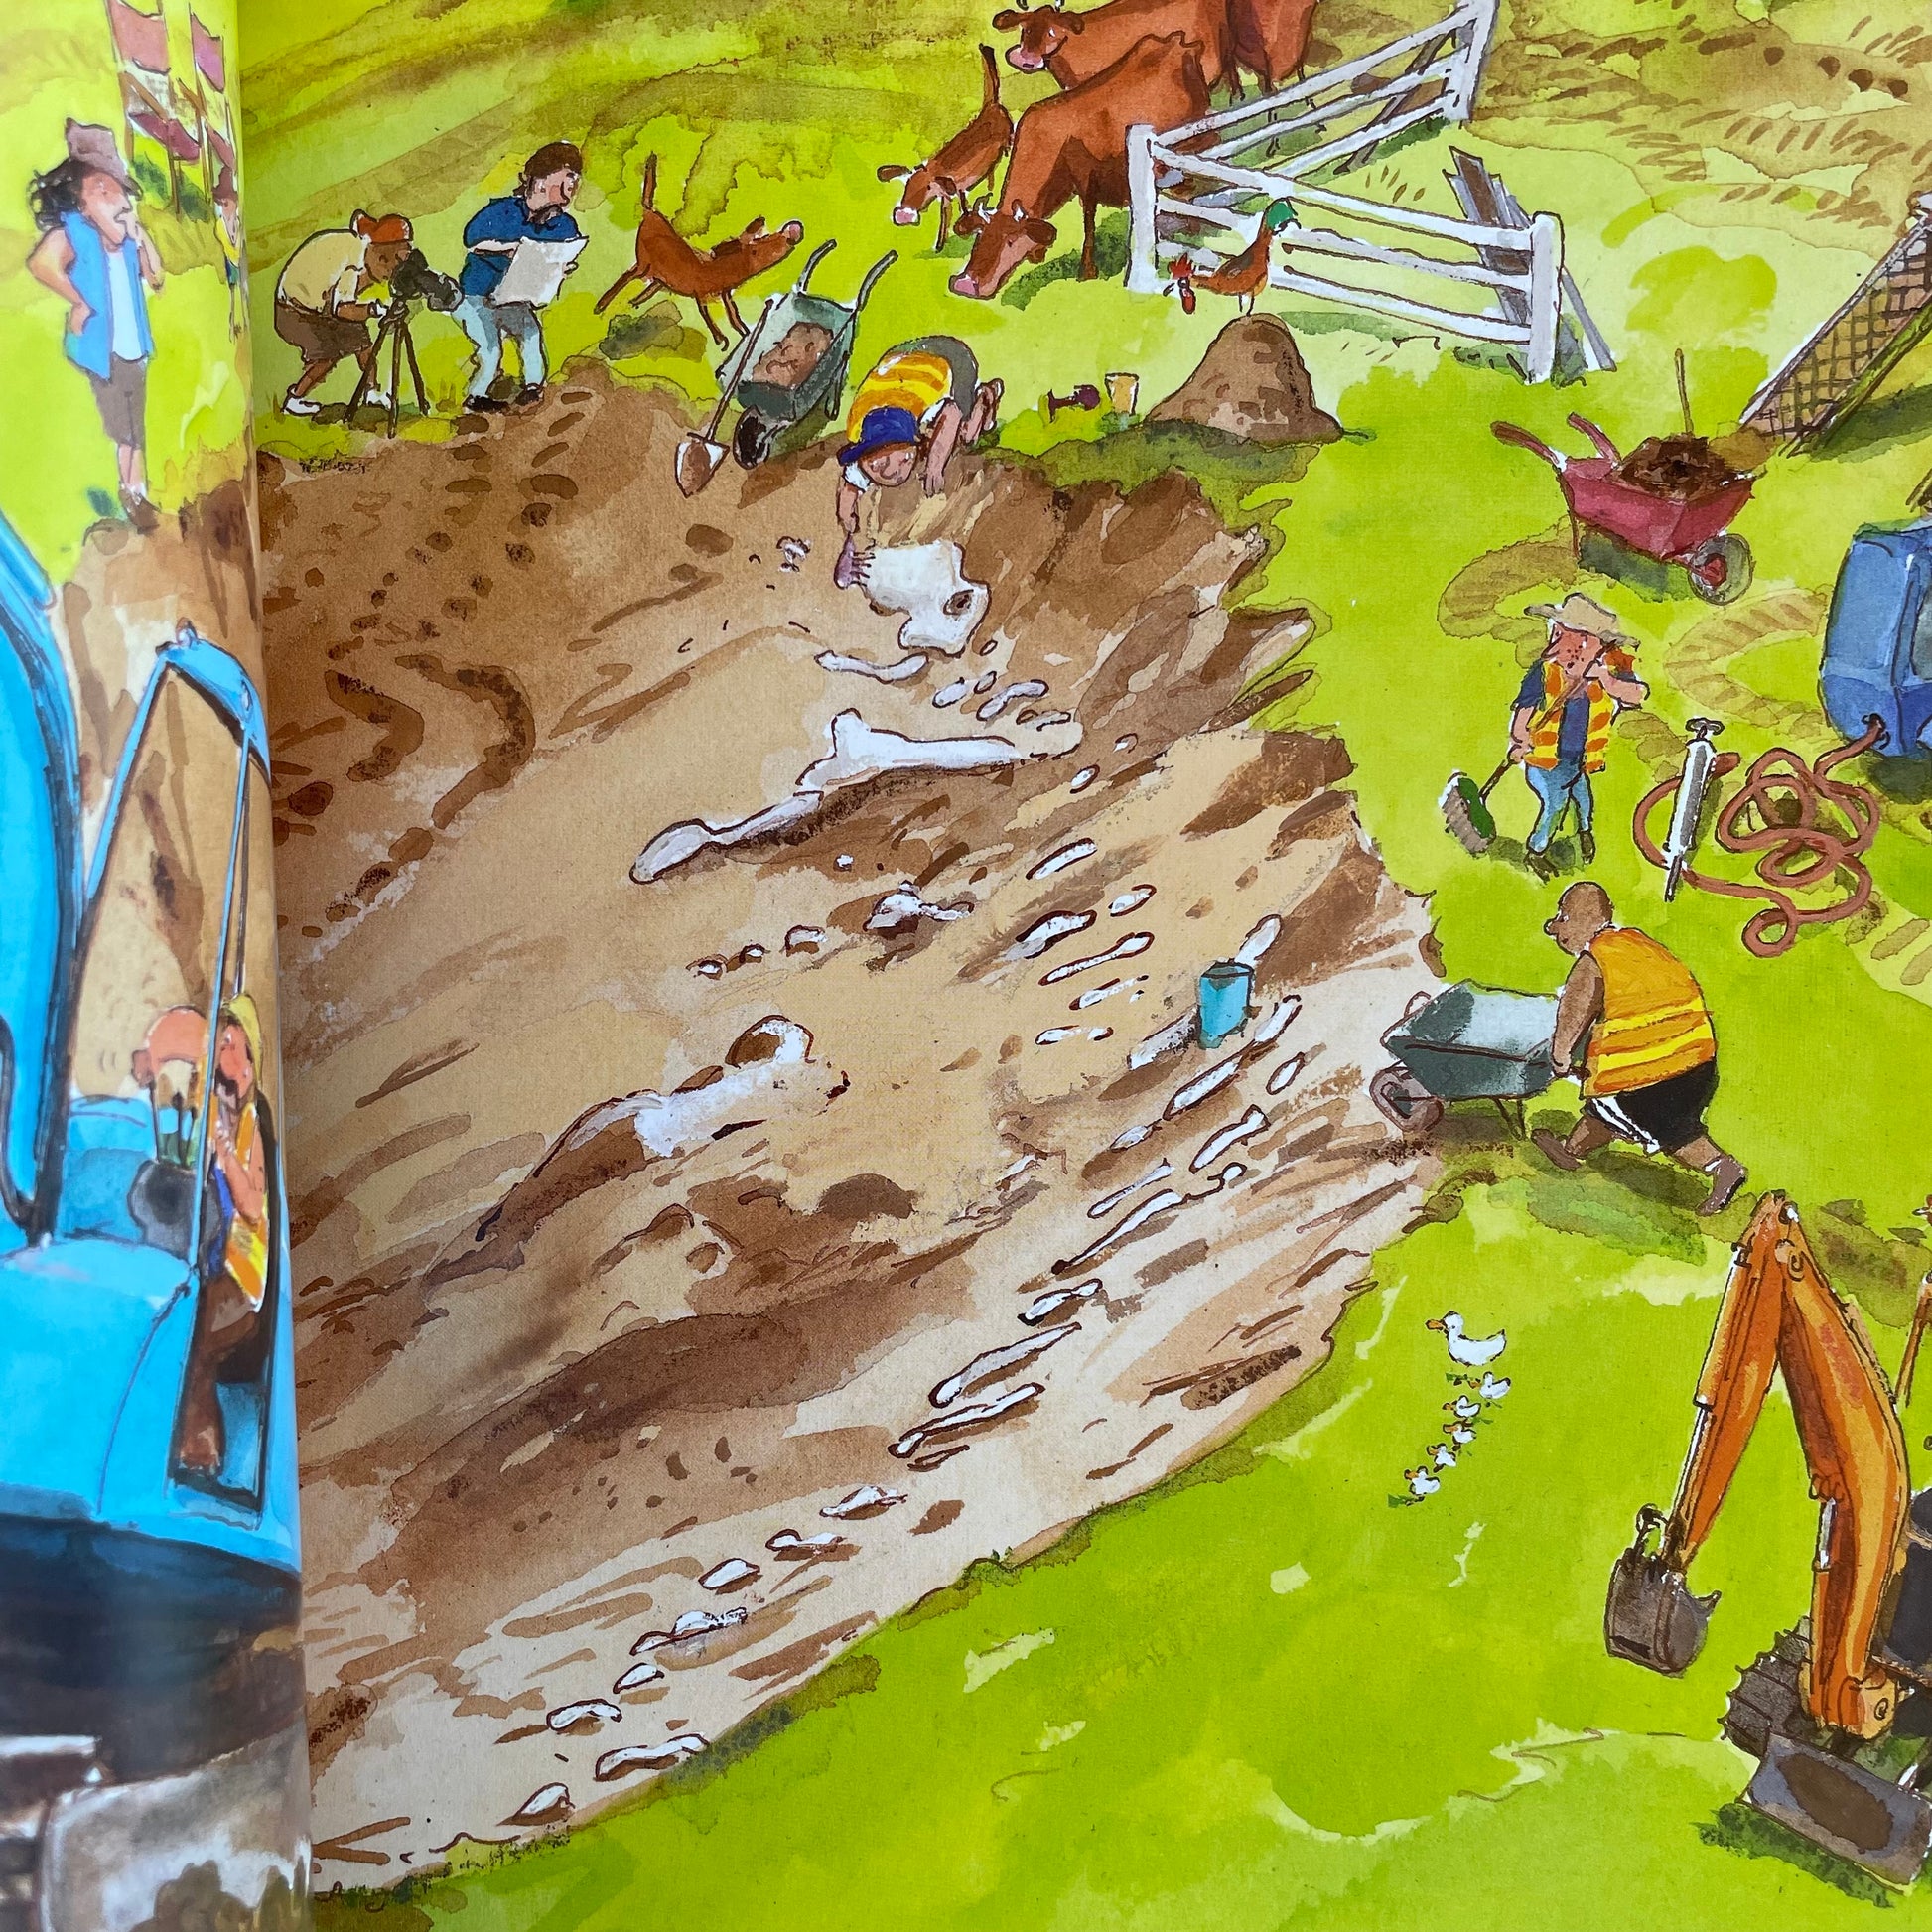 Inside page from the story showing an image of the whole community helping to dig a big hole.